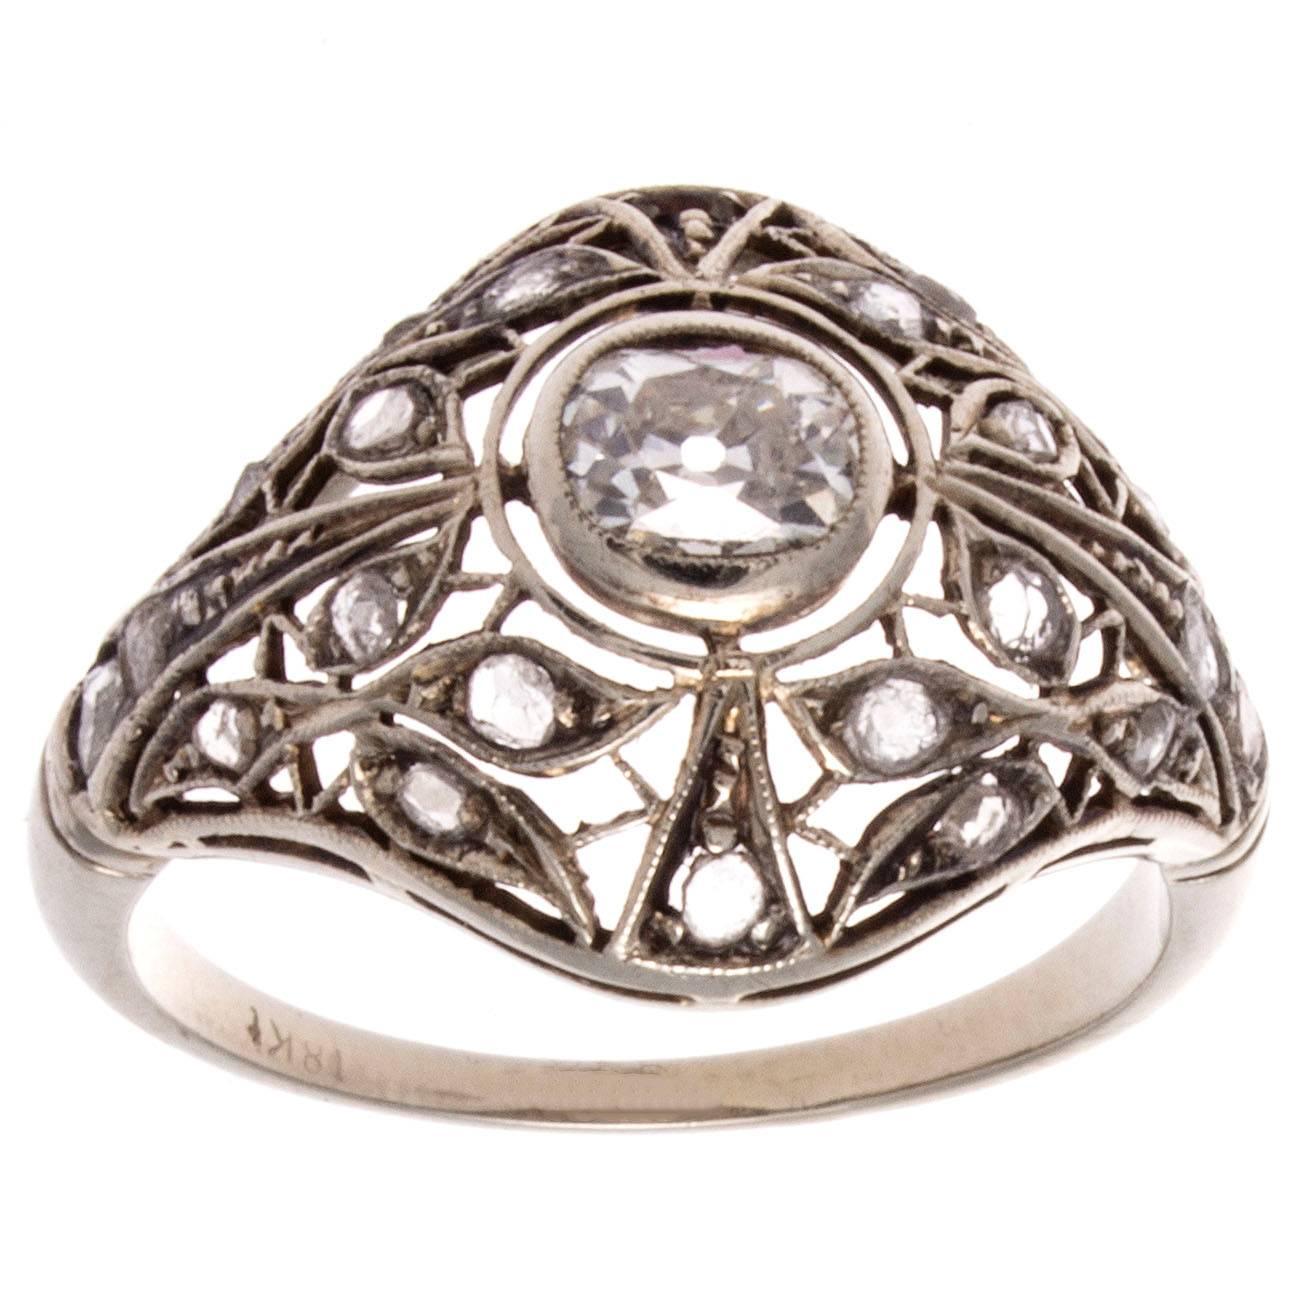 An elaborately hand crafted creation of superior craftsmanship. During the Victorian era there was an explosion of jewelry because of technology advances making jewelry available to the middle class and not just the aristocrats. This ring has been